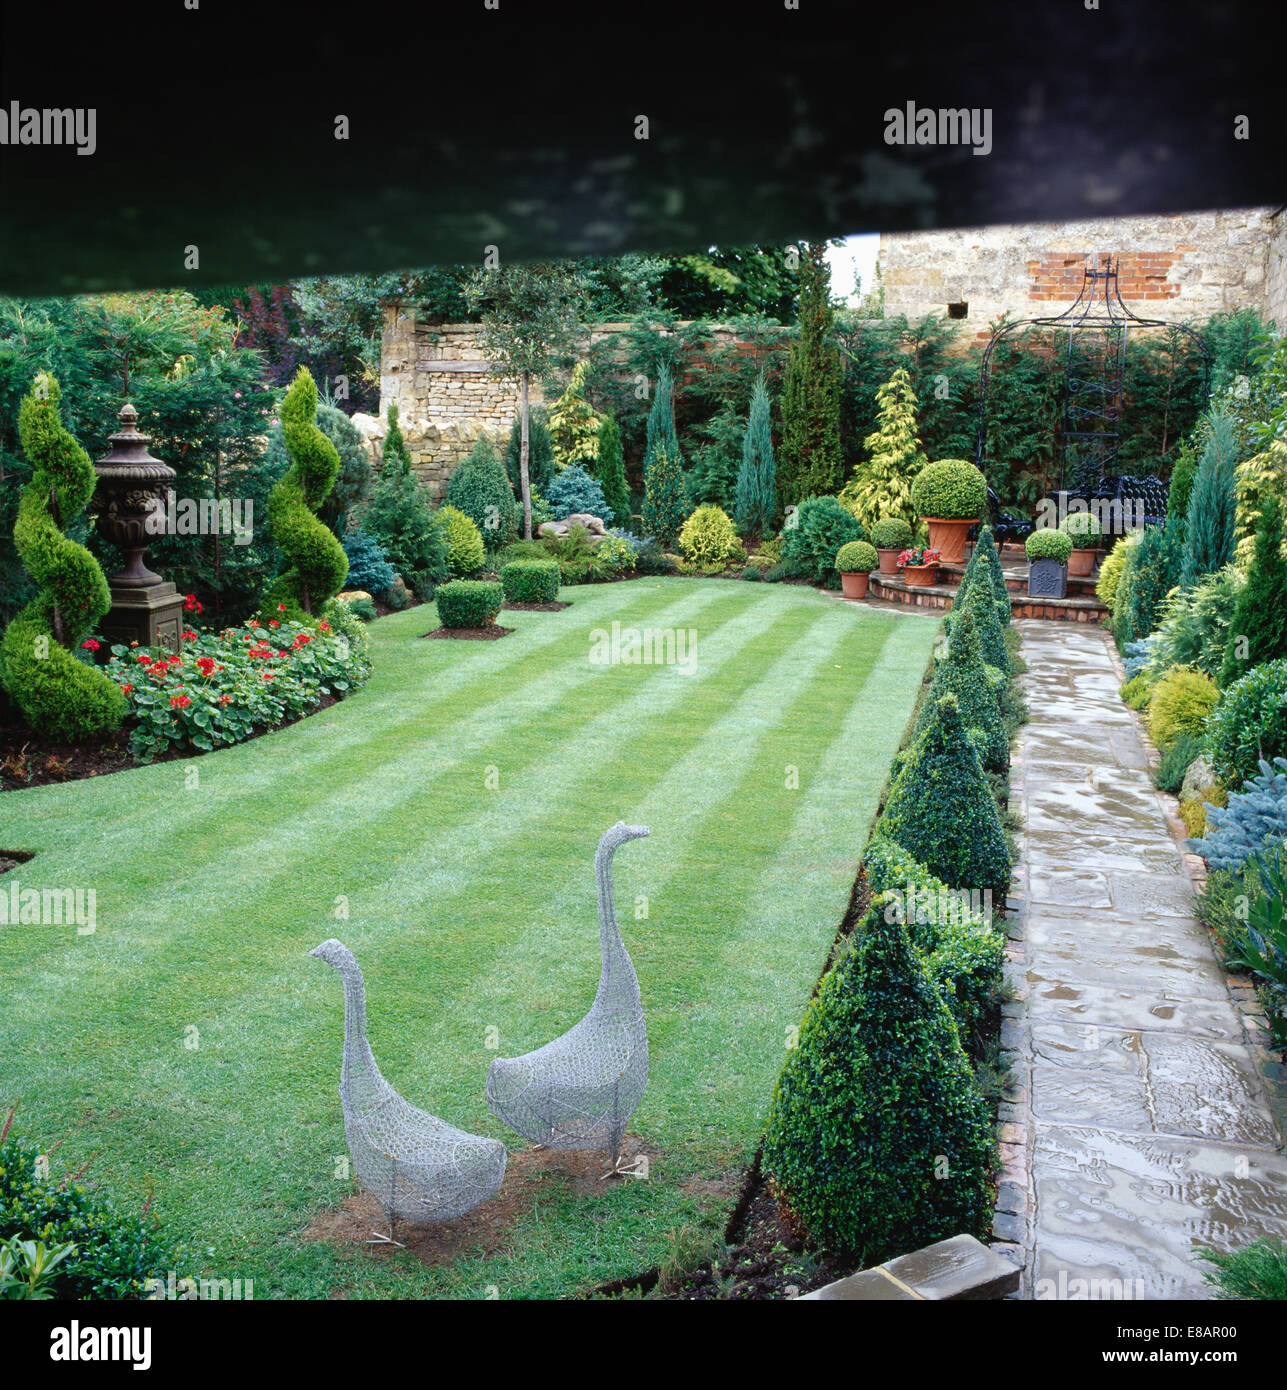 Two wire work goose statues on lawn surrounded by topiary trees in well maintained walled garden with paved path Stock Photo